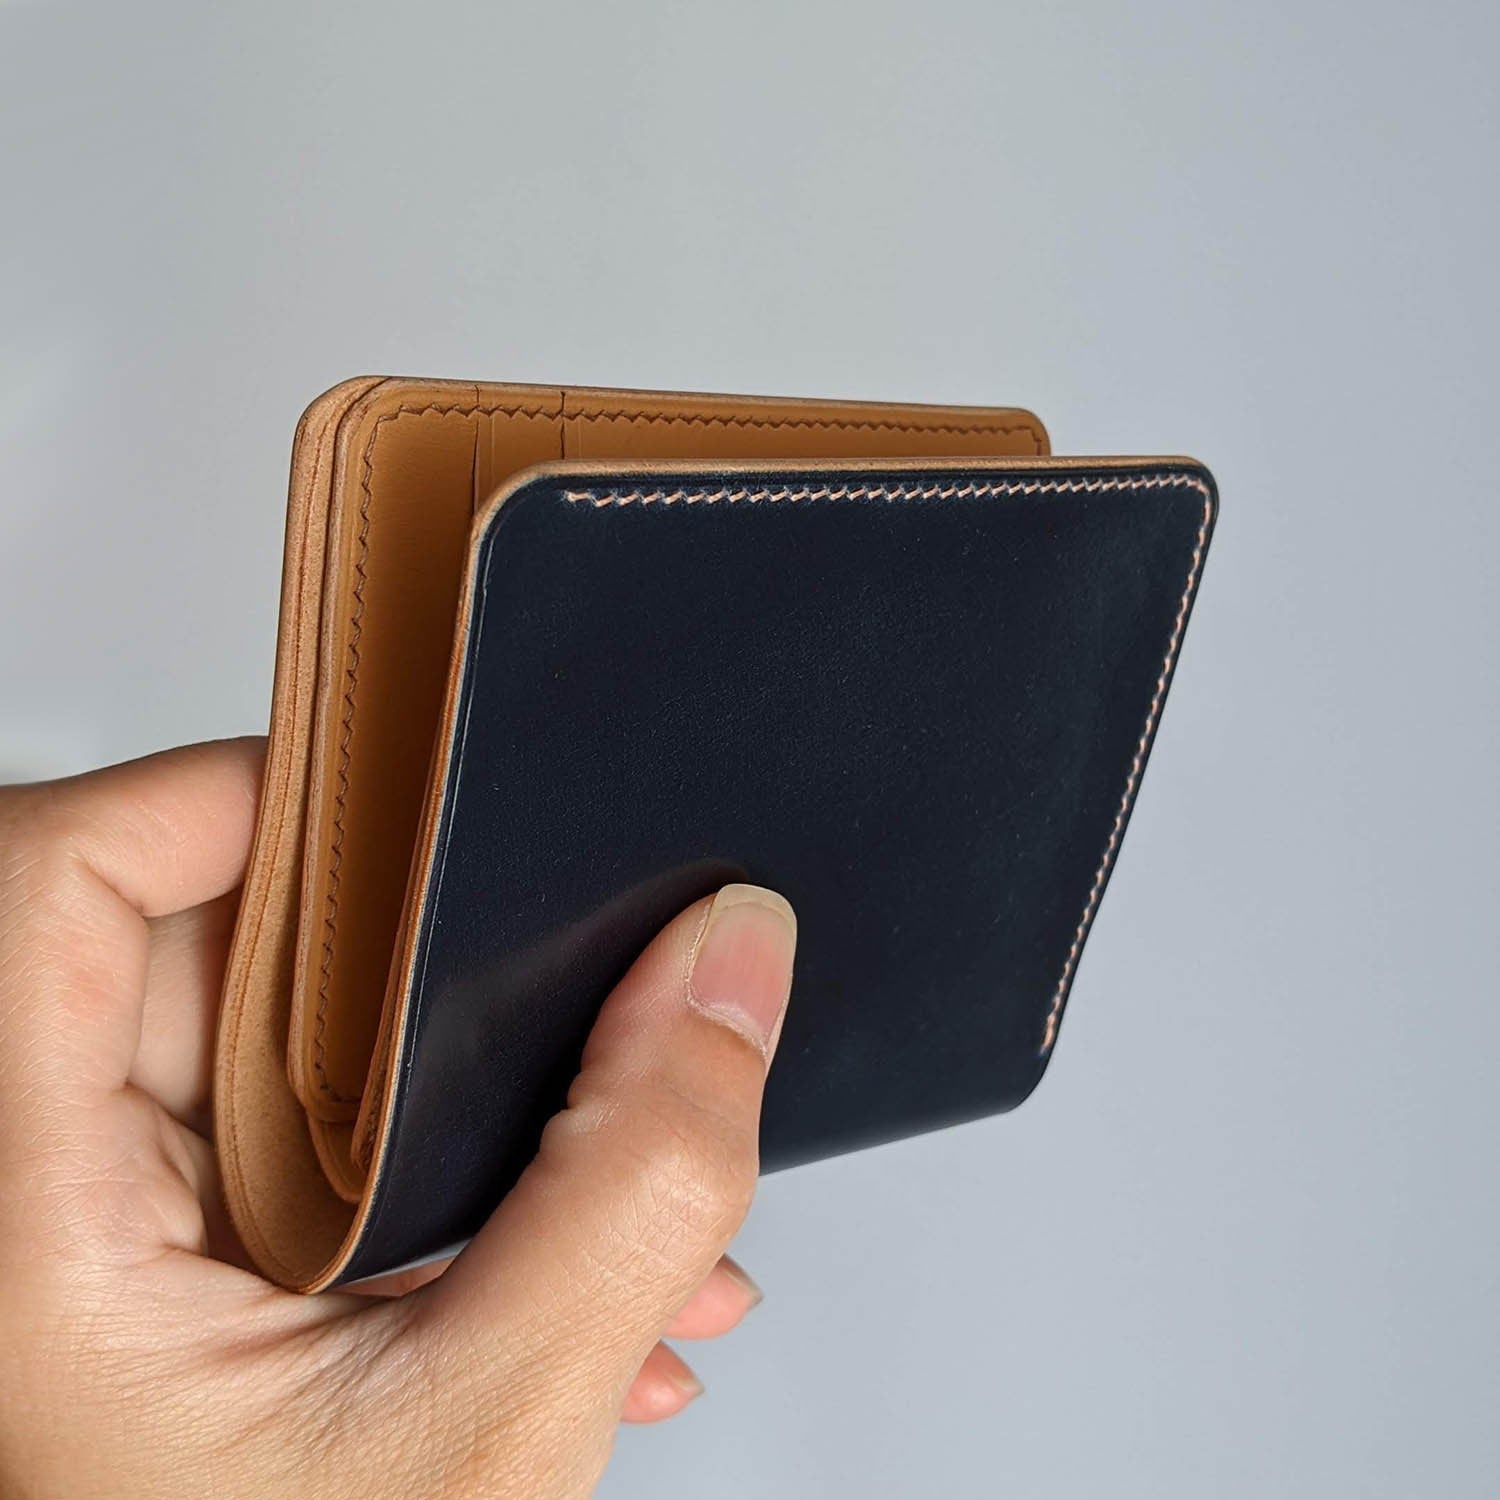 Made to Order Shell Cordovan Handmade Pocket Organizer Bifold Vertical Wallet Navy Blue and Natural Italian Vegetable Tanned Leather with Bill Divider